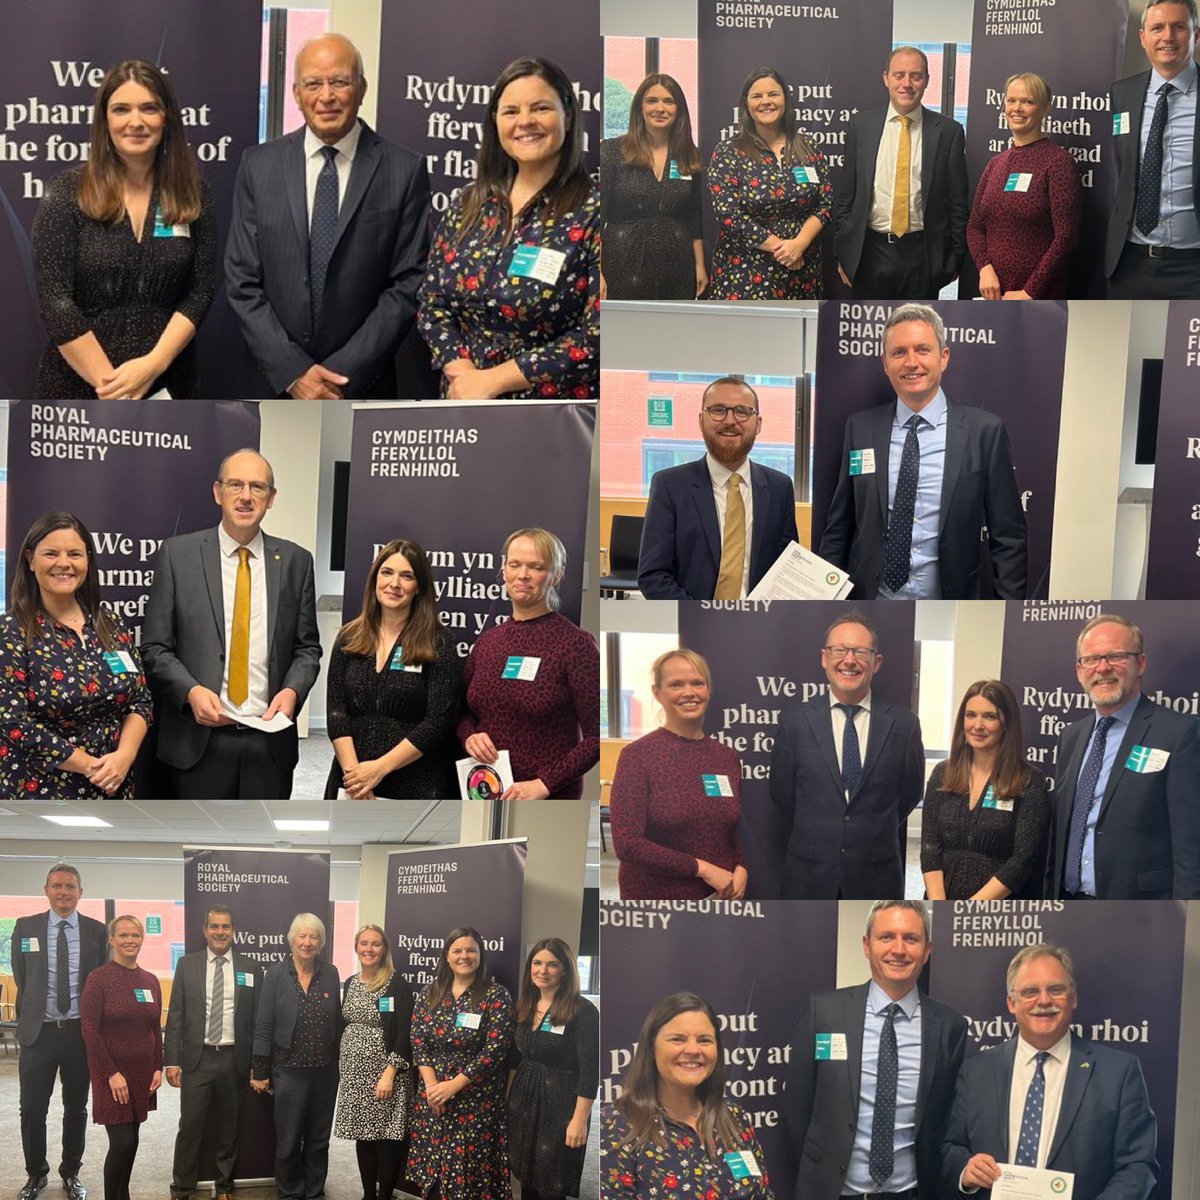 Huge thank you to all Members of the Senedd who came to speak to our team of staff and board members @RPS_Wales about the great work of pharmacy teams across all sectors, the positive impact of independent prescribing and our ambitions aligned to @PDaHW